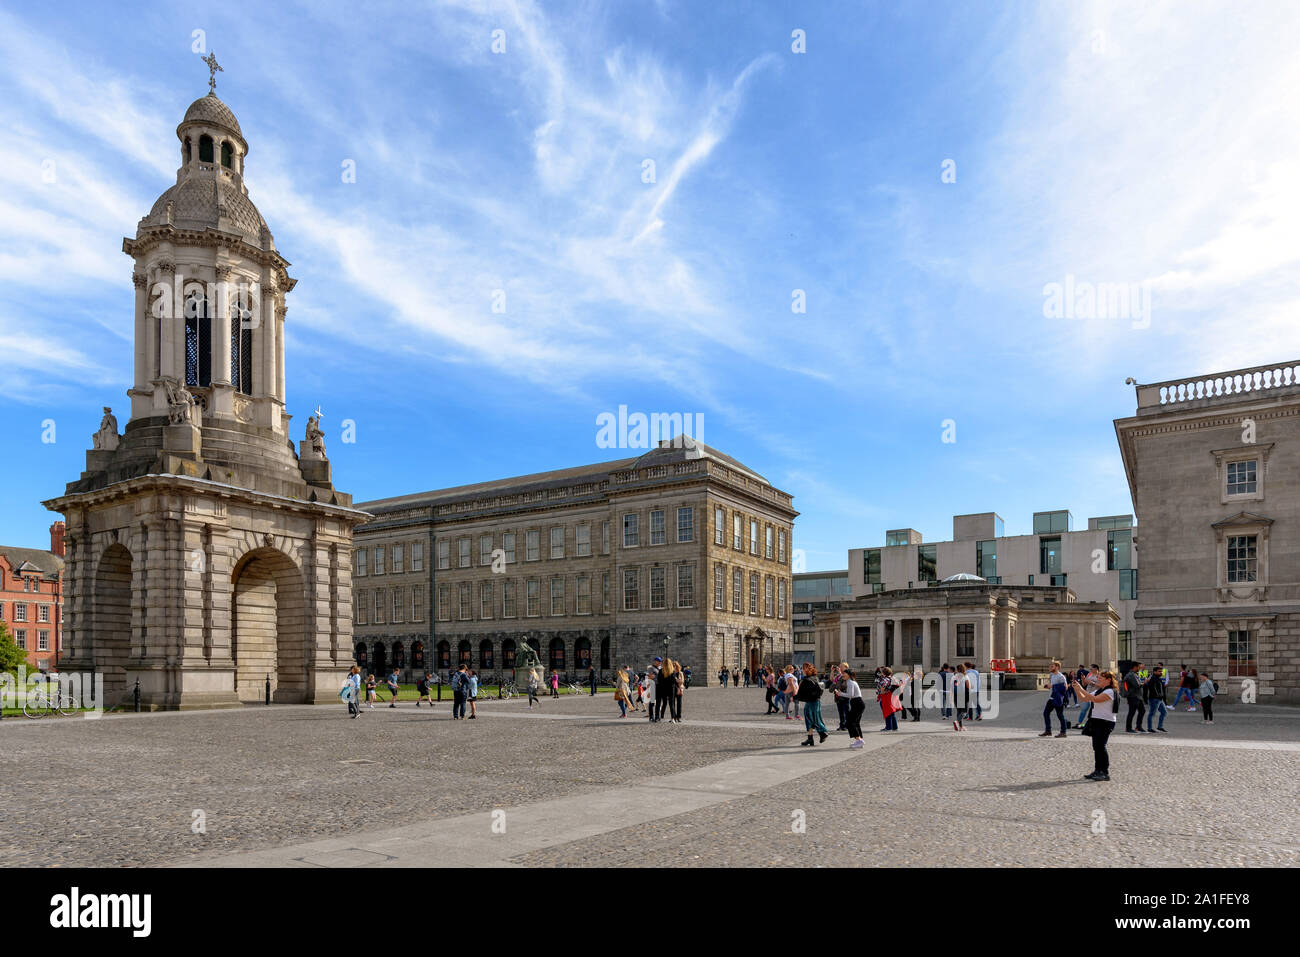 The Campanile and Old Library at Trinity College Dublin as seen from Parliament Square on a sunny day Stock Photo